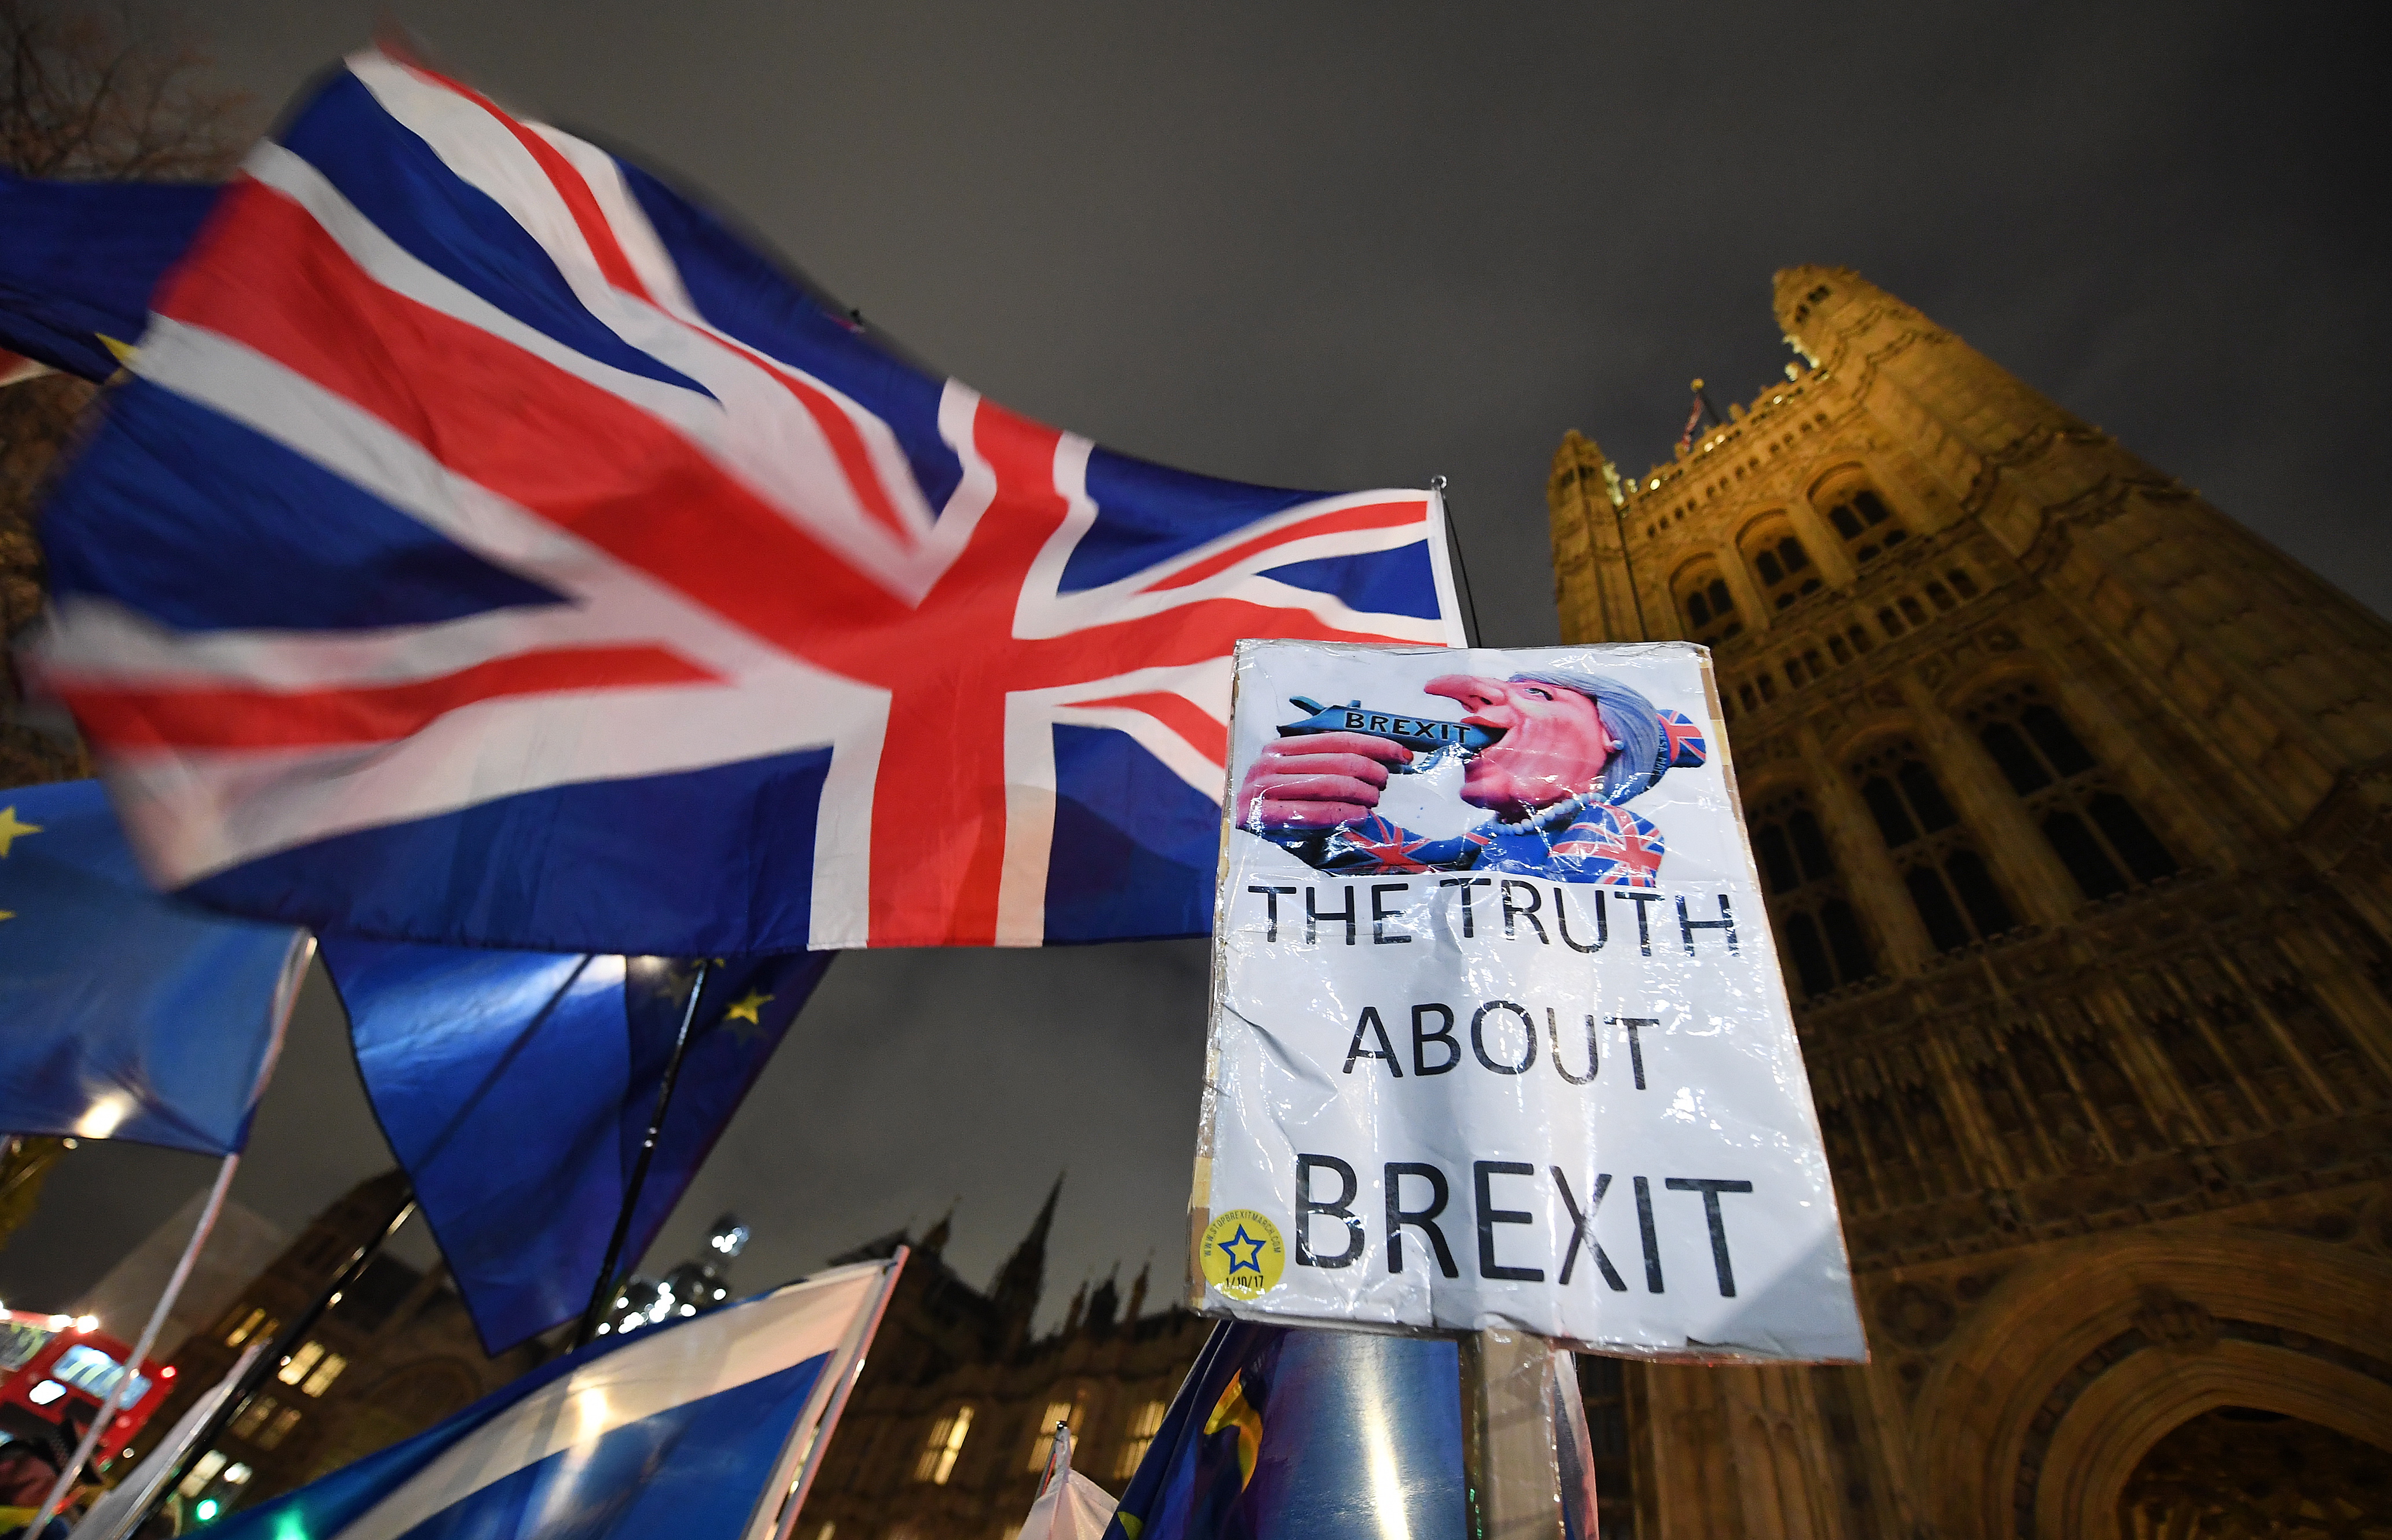 epa07287345 Pro EU protesters demonstrate outside of the Parliament in London, Britain, 15 January 2019. Parliamentarians are voting on the postponed Brexit EU Withdrawal Agreement, commonly known as The Meaningful Vote, deciding on Britain's future relationship with the European Union.  EPA/ANDY RAIN